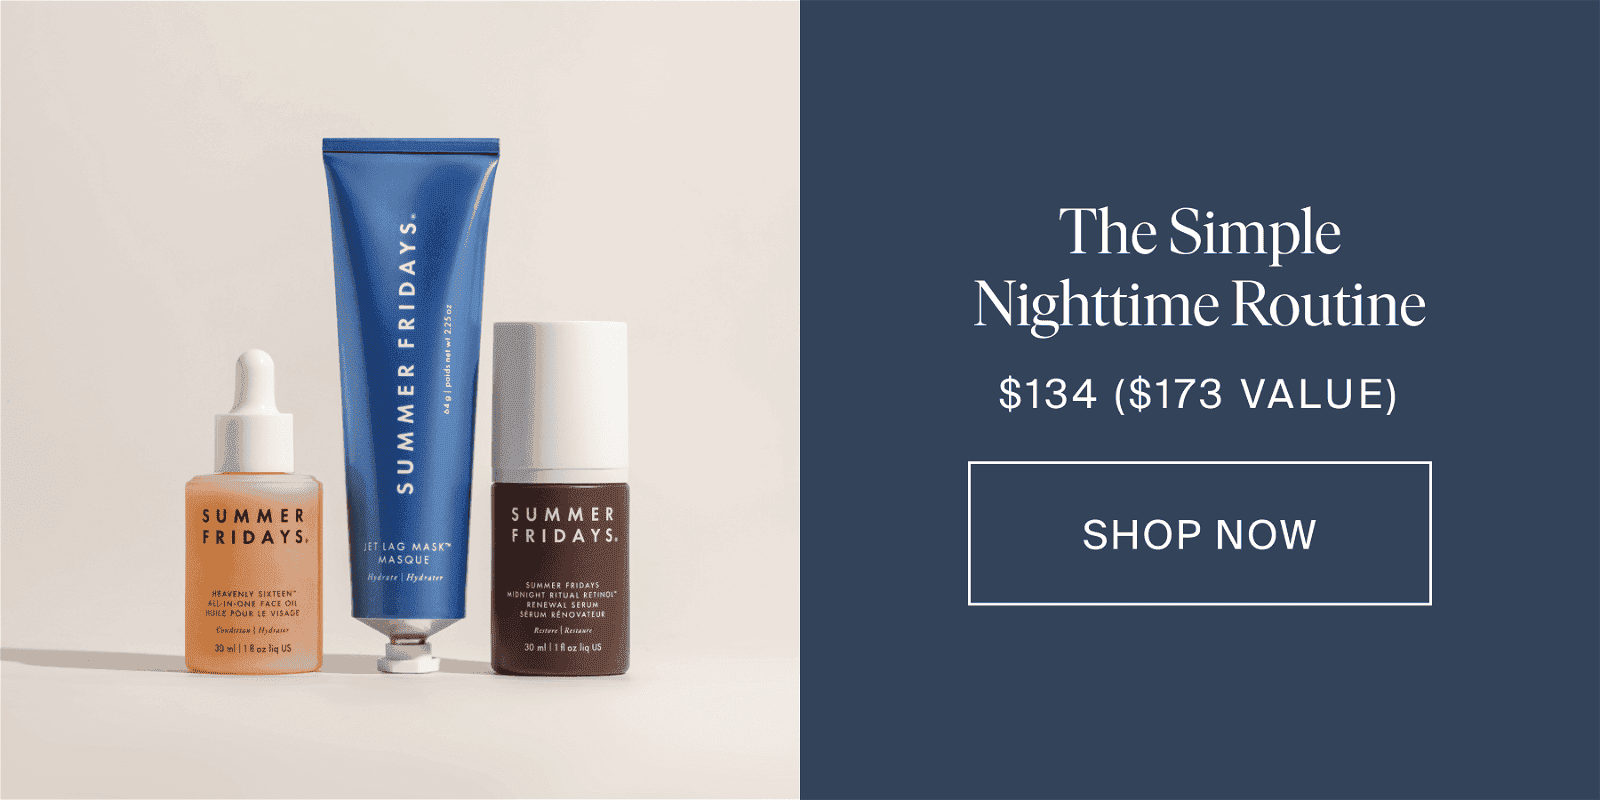 The Simple Nighttime Routine